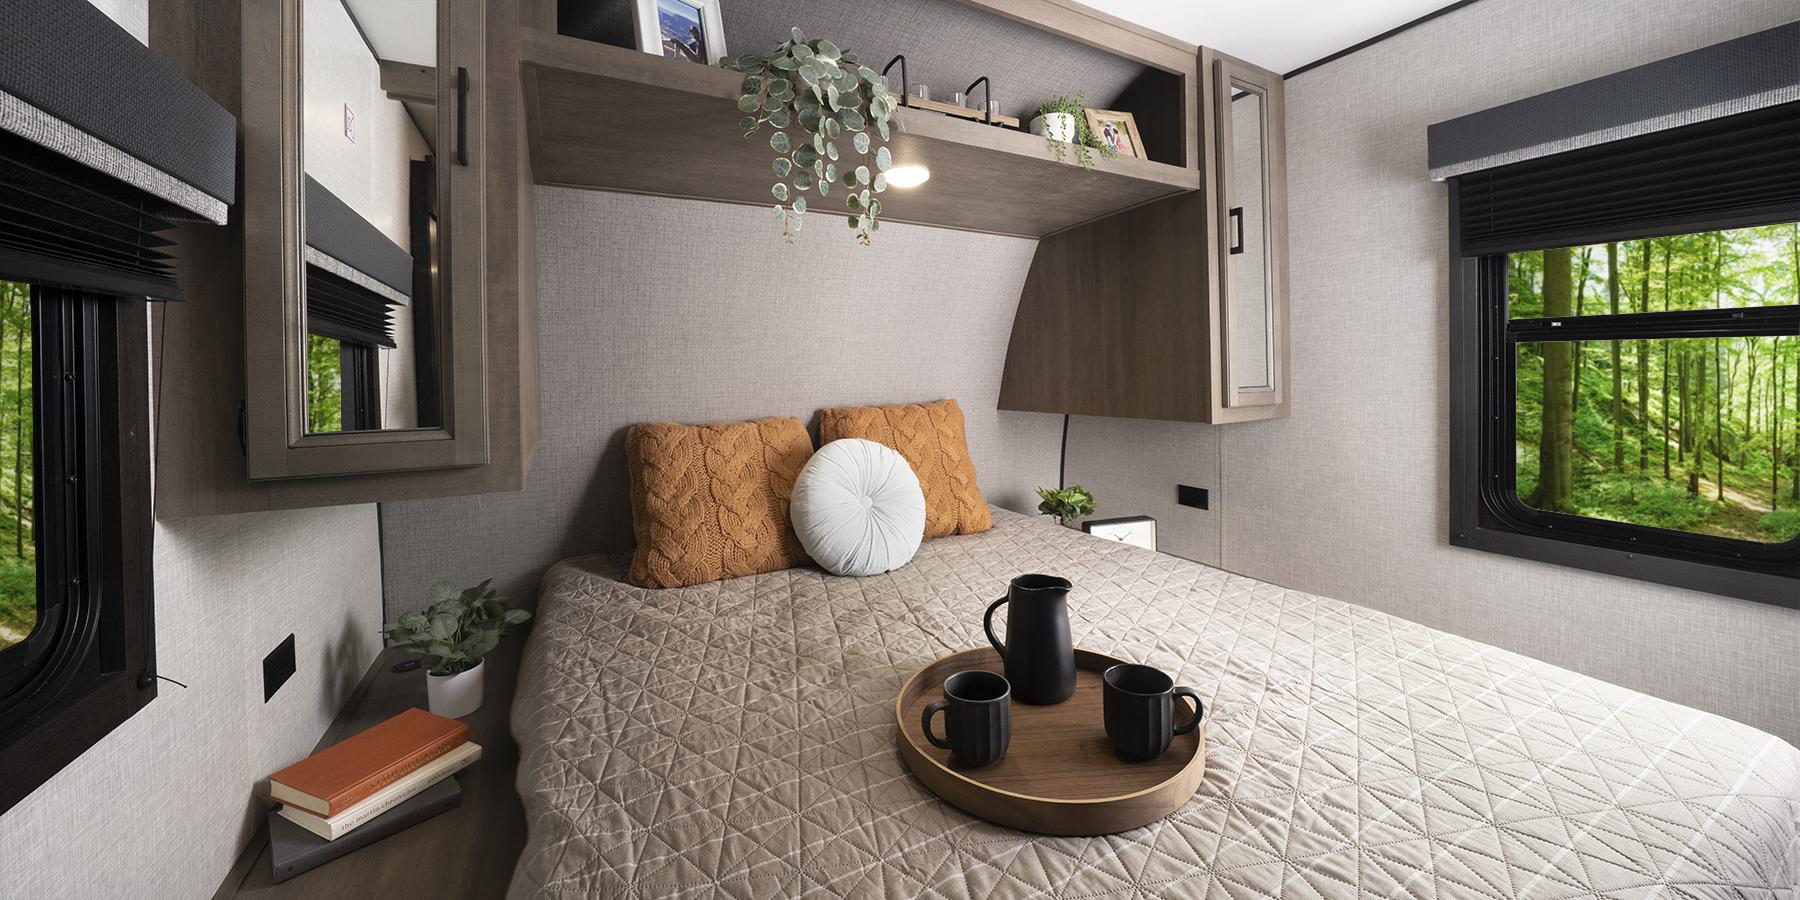 A queen bed with built-in overhead storage. There are windows on either side of the bed.